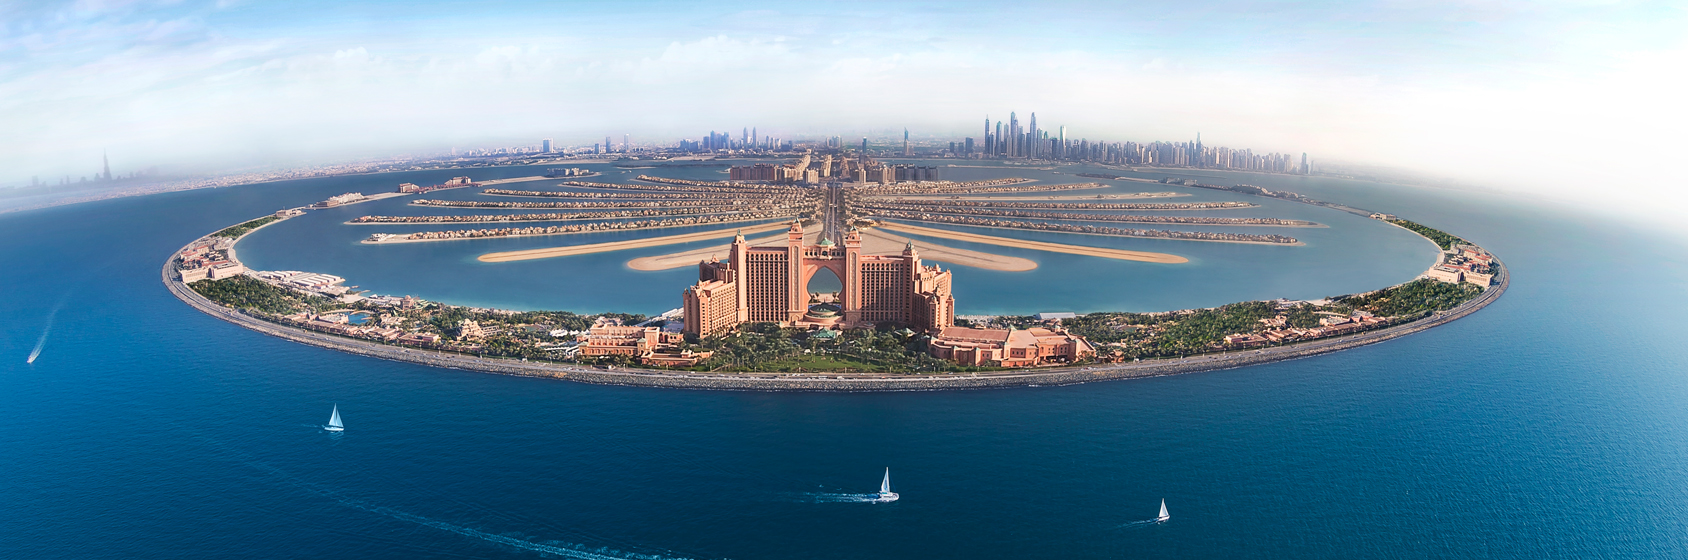 Richard Ayoade and Johnny Vegas Explore Atlantis, The Palm in Travel Man, 48 Hours in Dubai